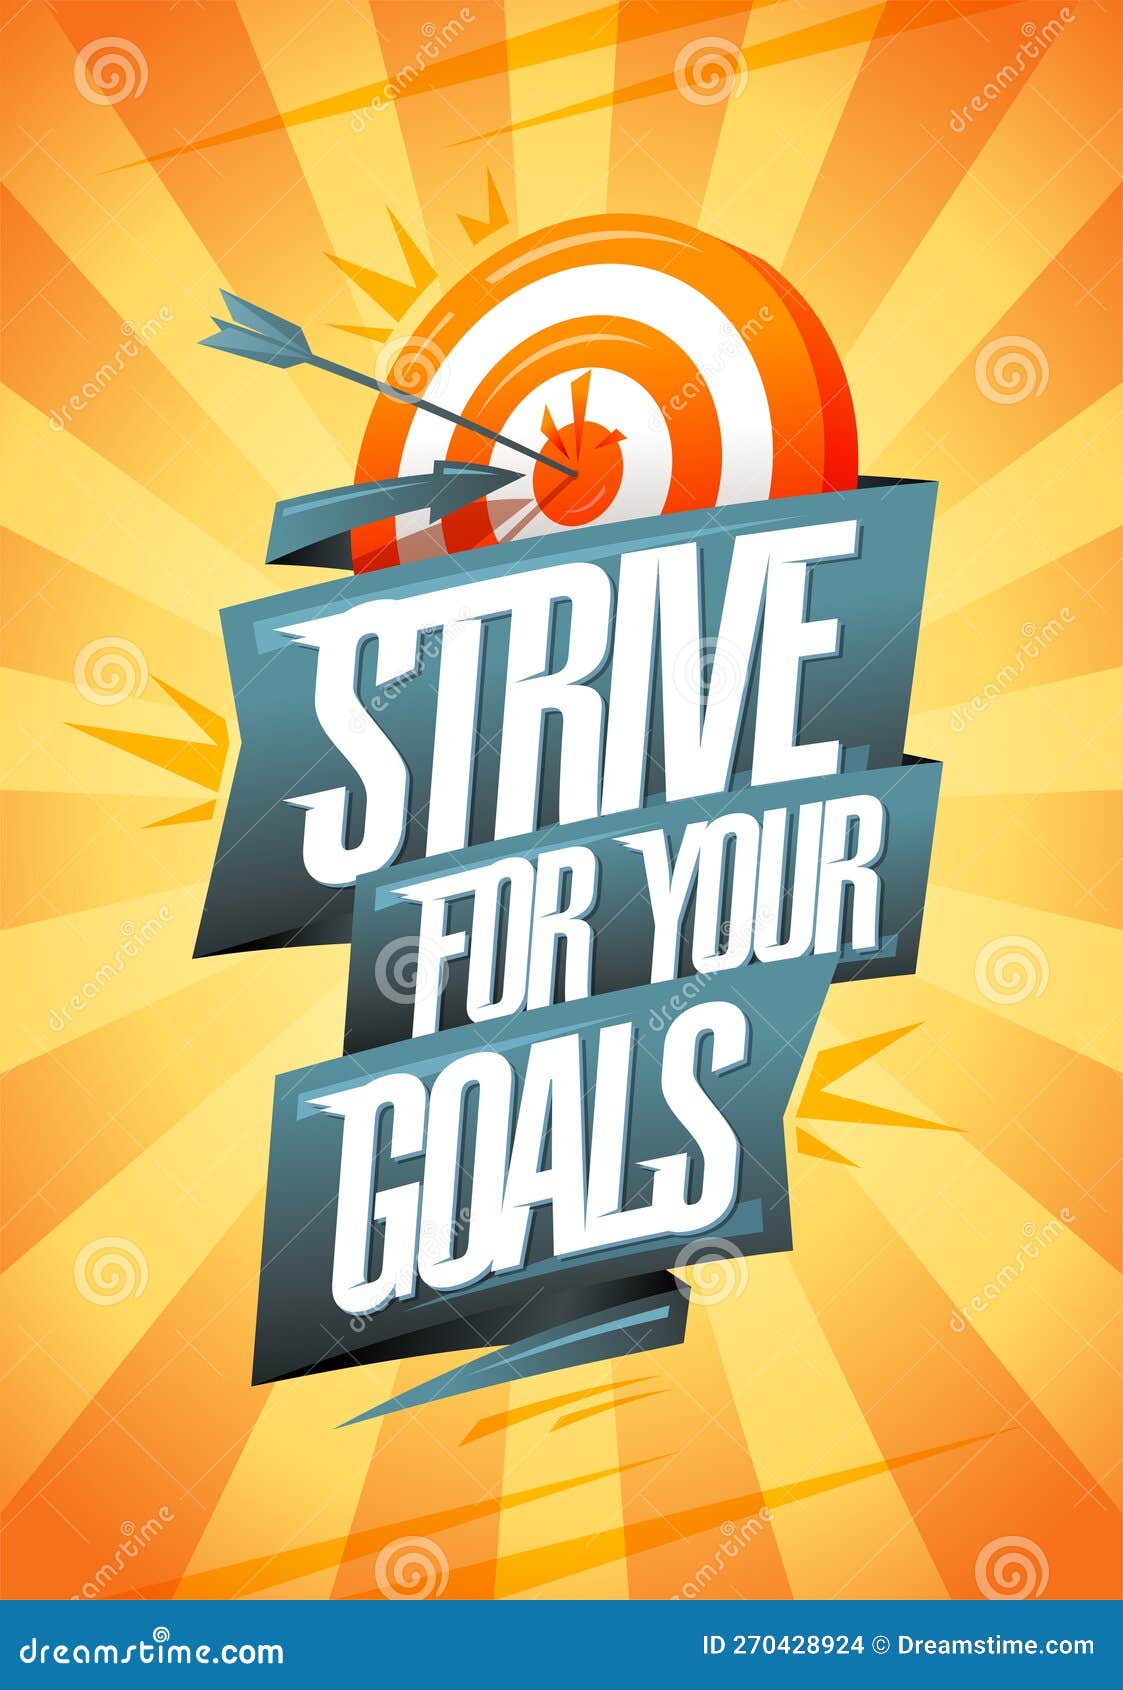 strive for your goals - motivational poster or flyer template